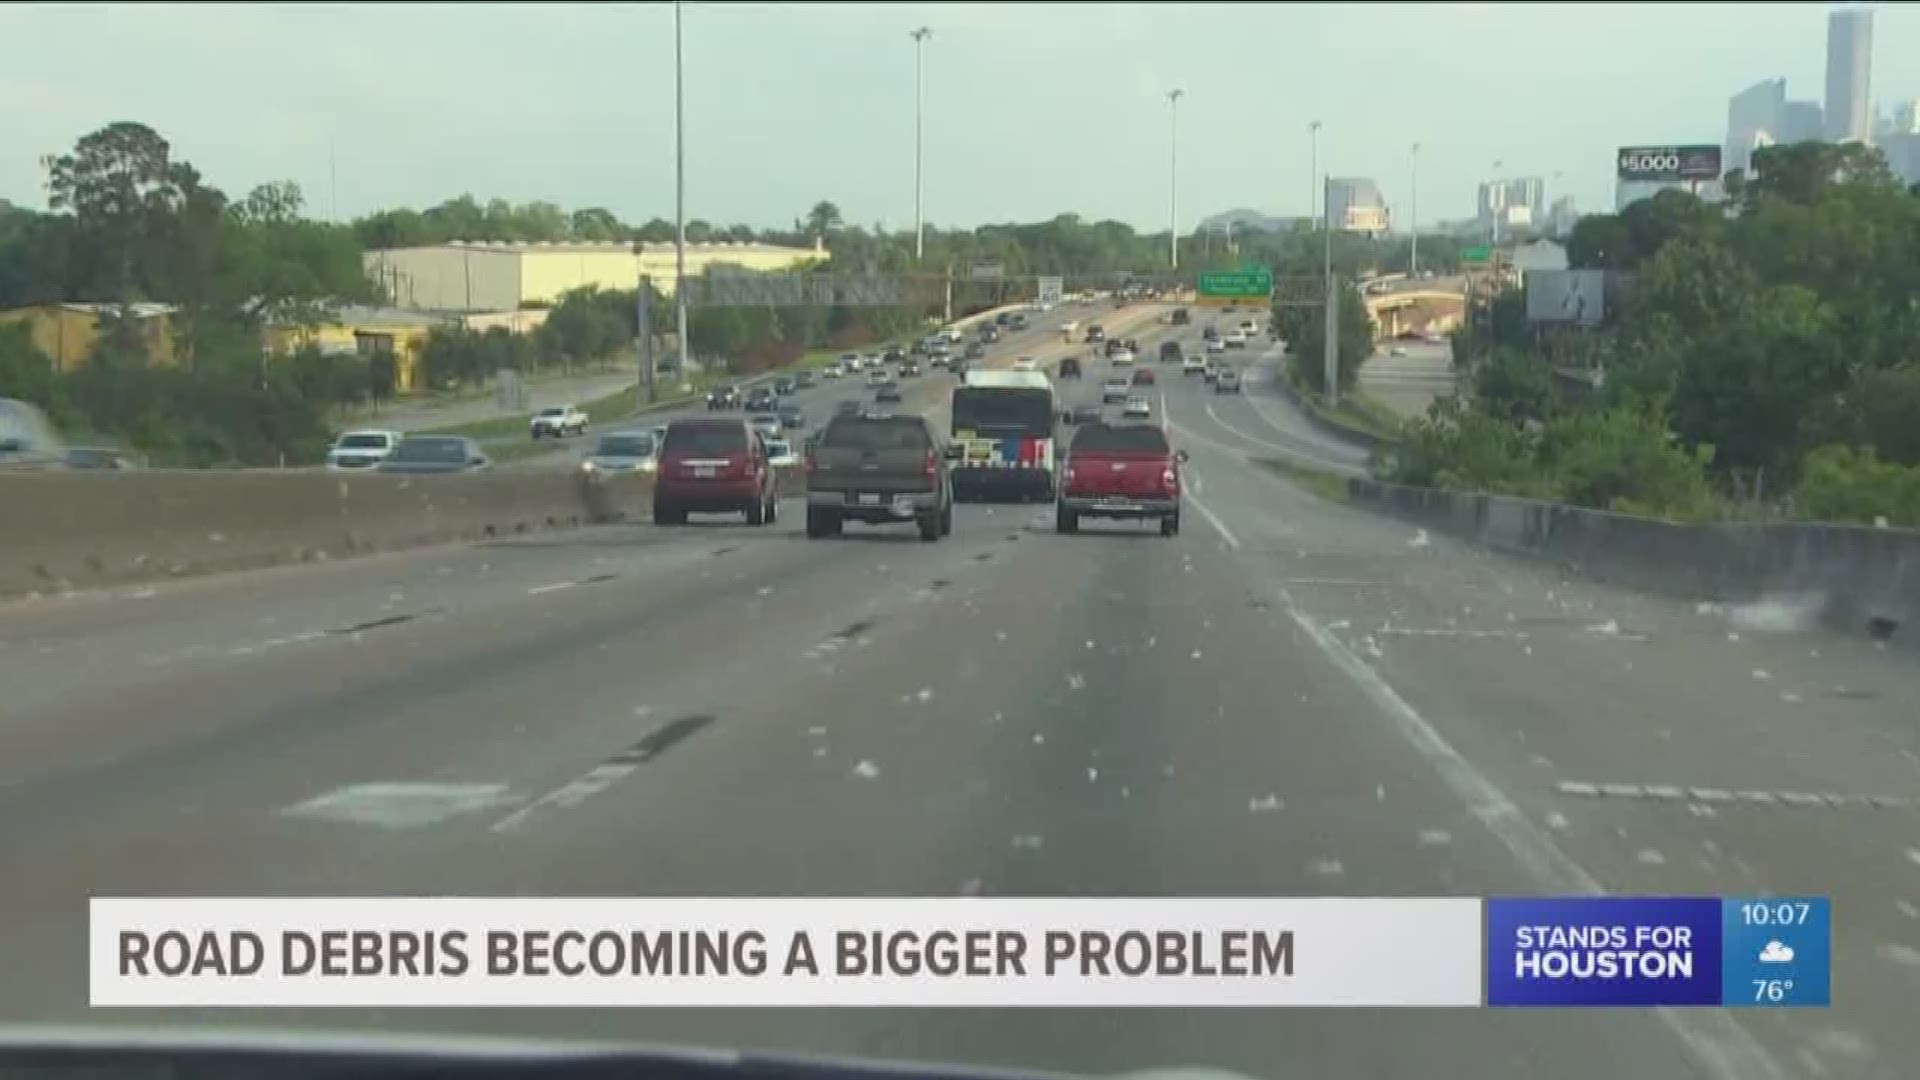 Road debris has become a huge problem in the Houston area and the Harris County Sheriff's Office says drivers could face criminal charges if they lose their load on the road